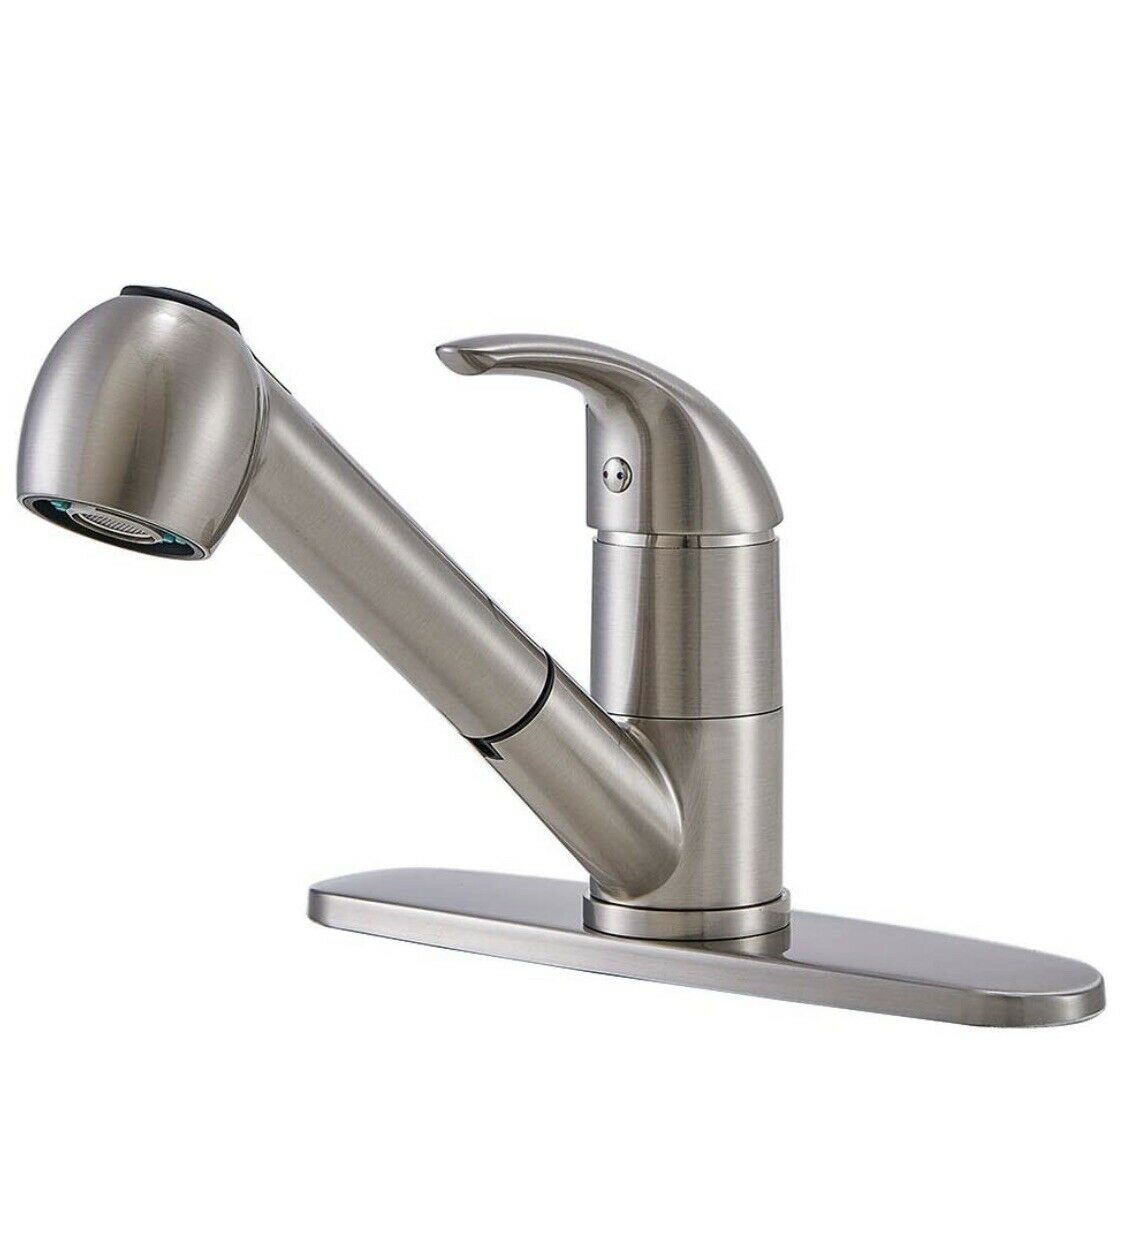 KINGO HOME Modern Brushed Nickel Pull Out Kitchen Faucet